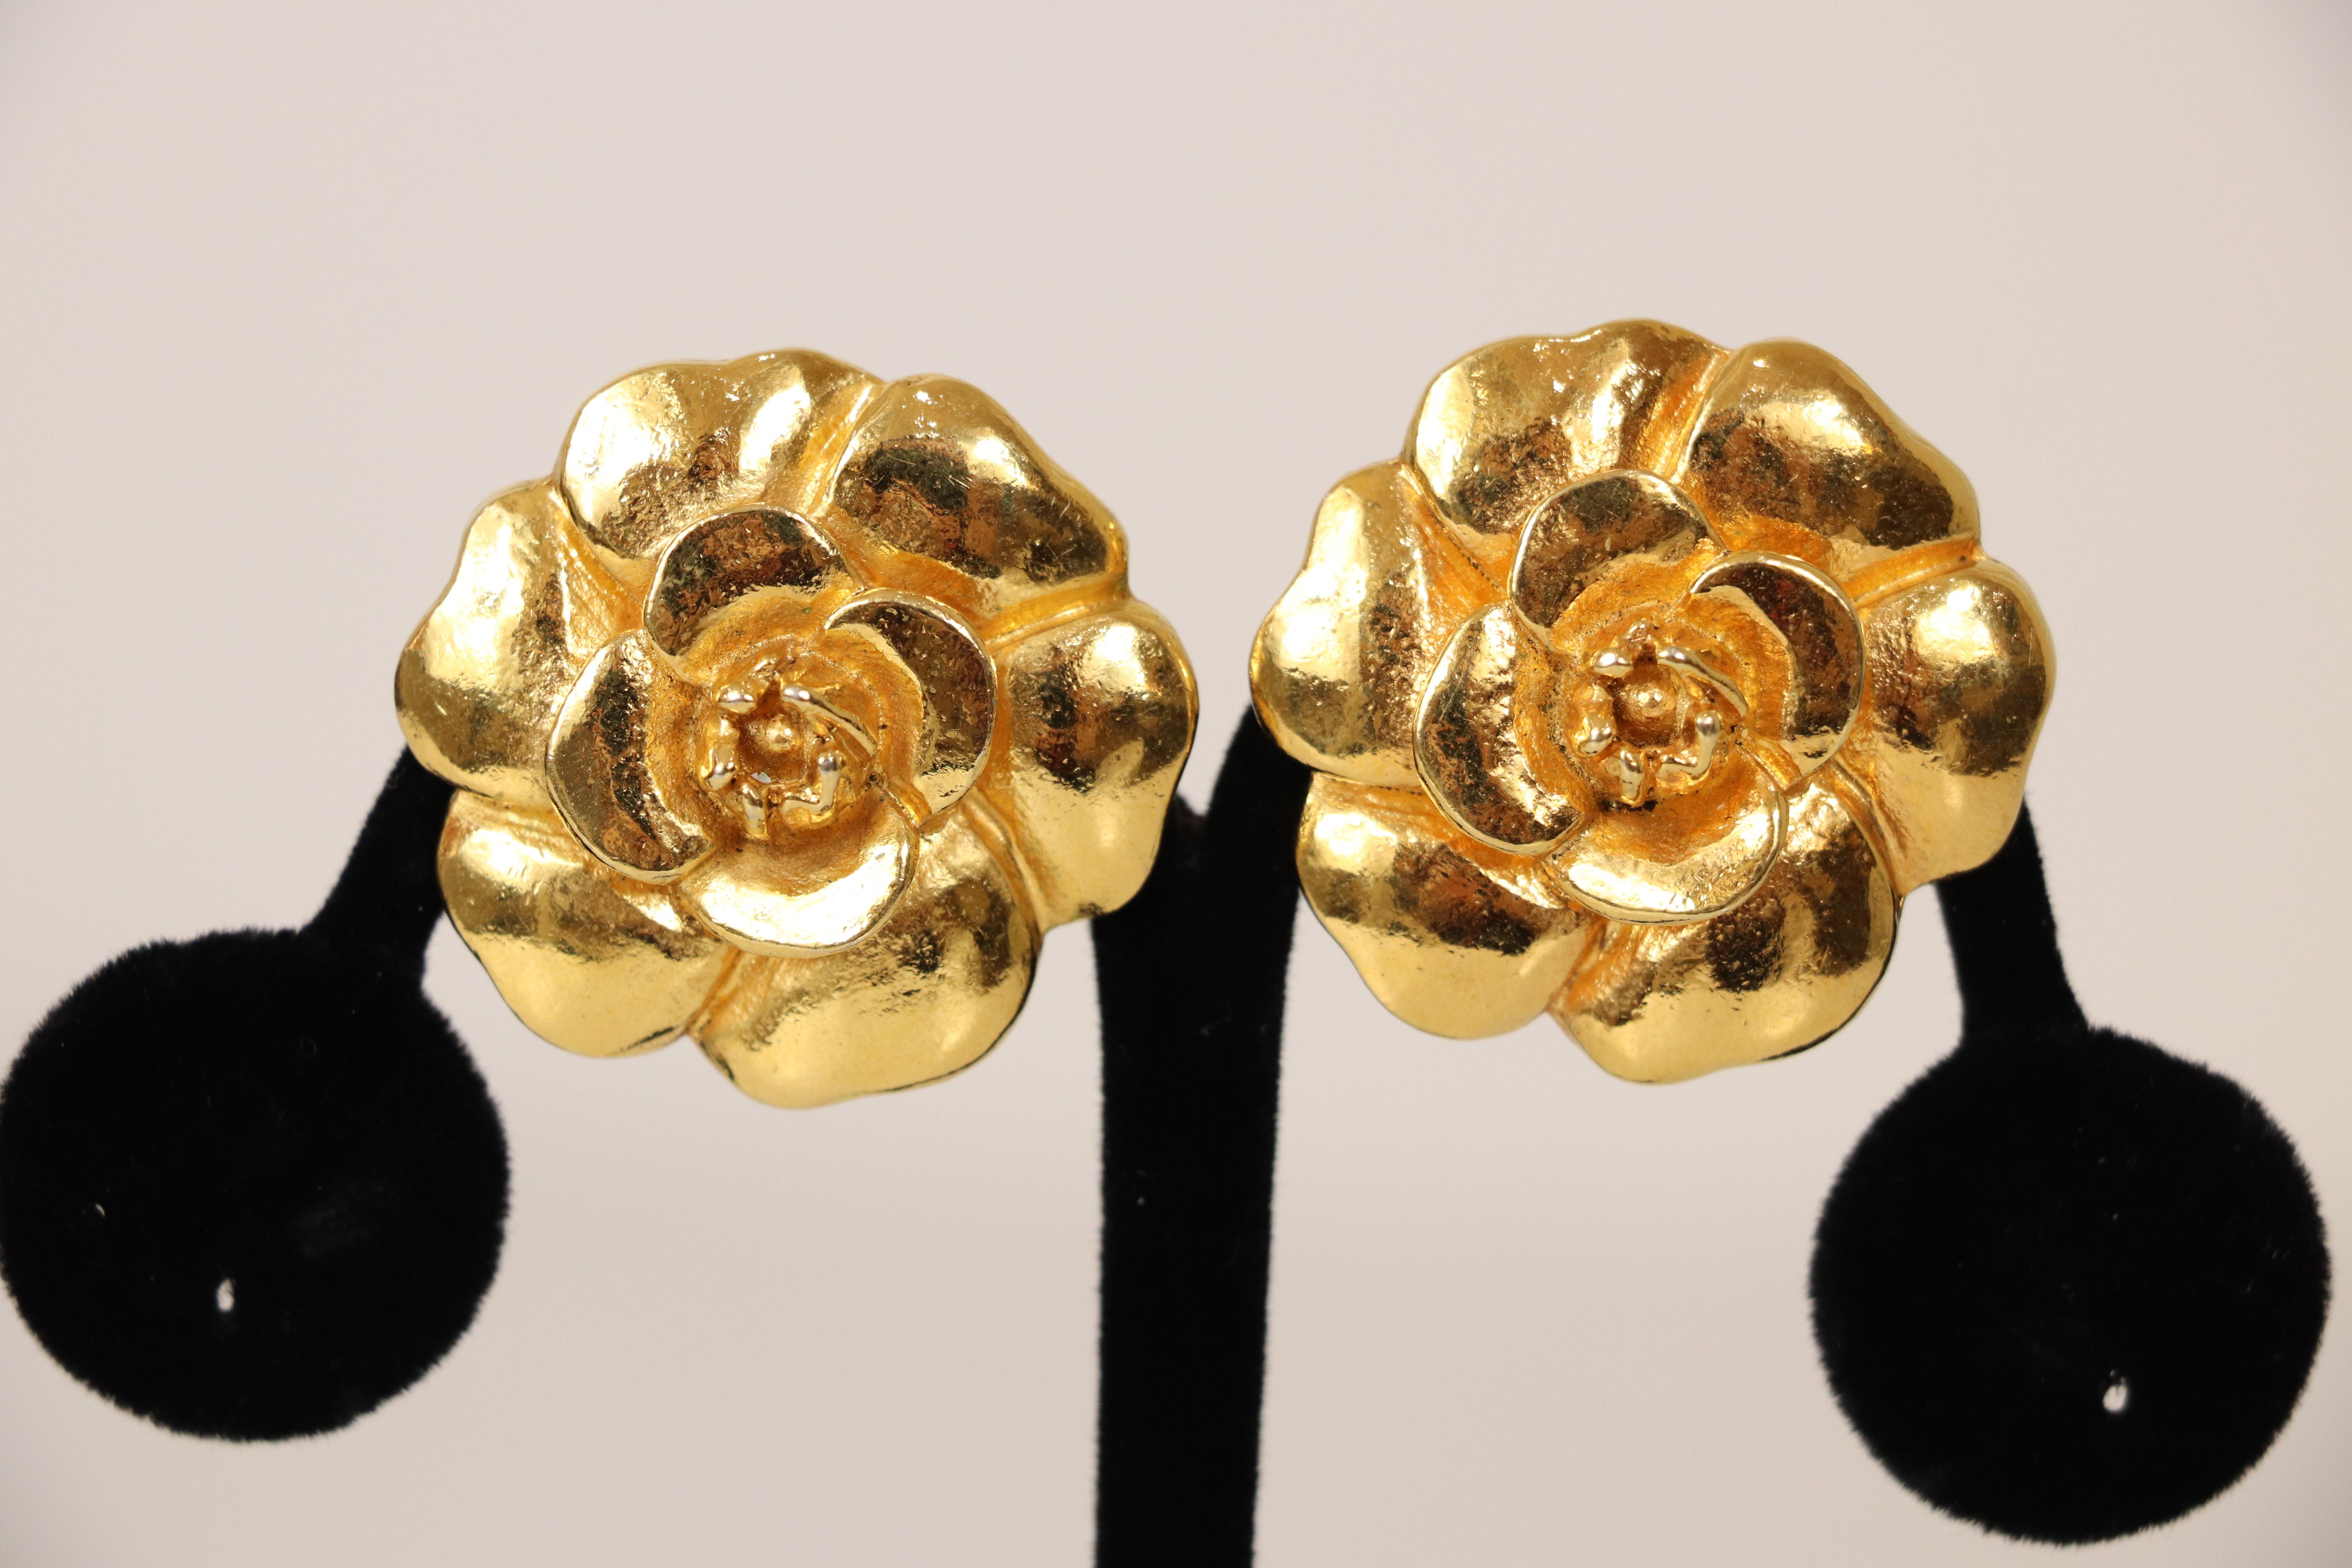 Chanel vintage earrings. 1970's era. 24k gold plated Camellia earrings with clip-on backings. Made in France. Earrings measure at 1.25